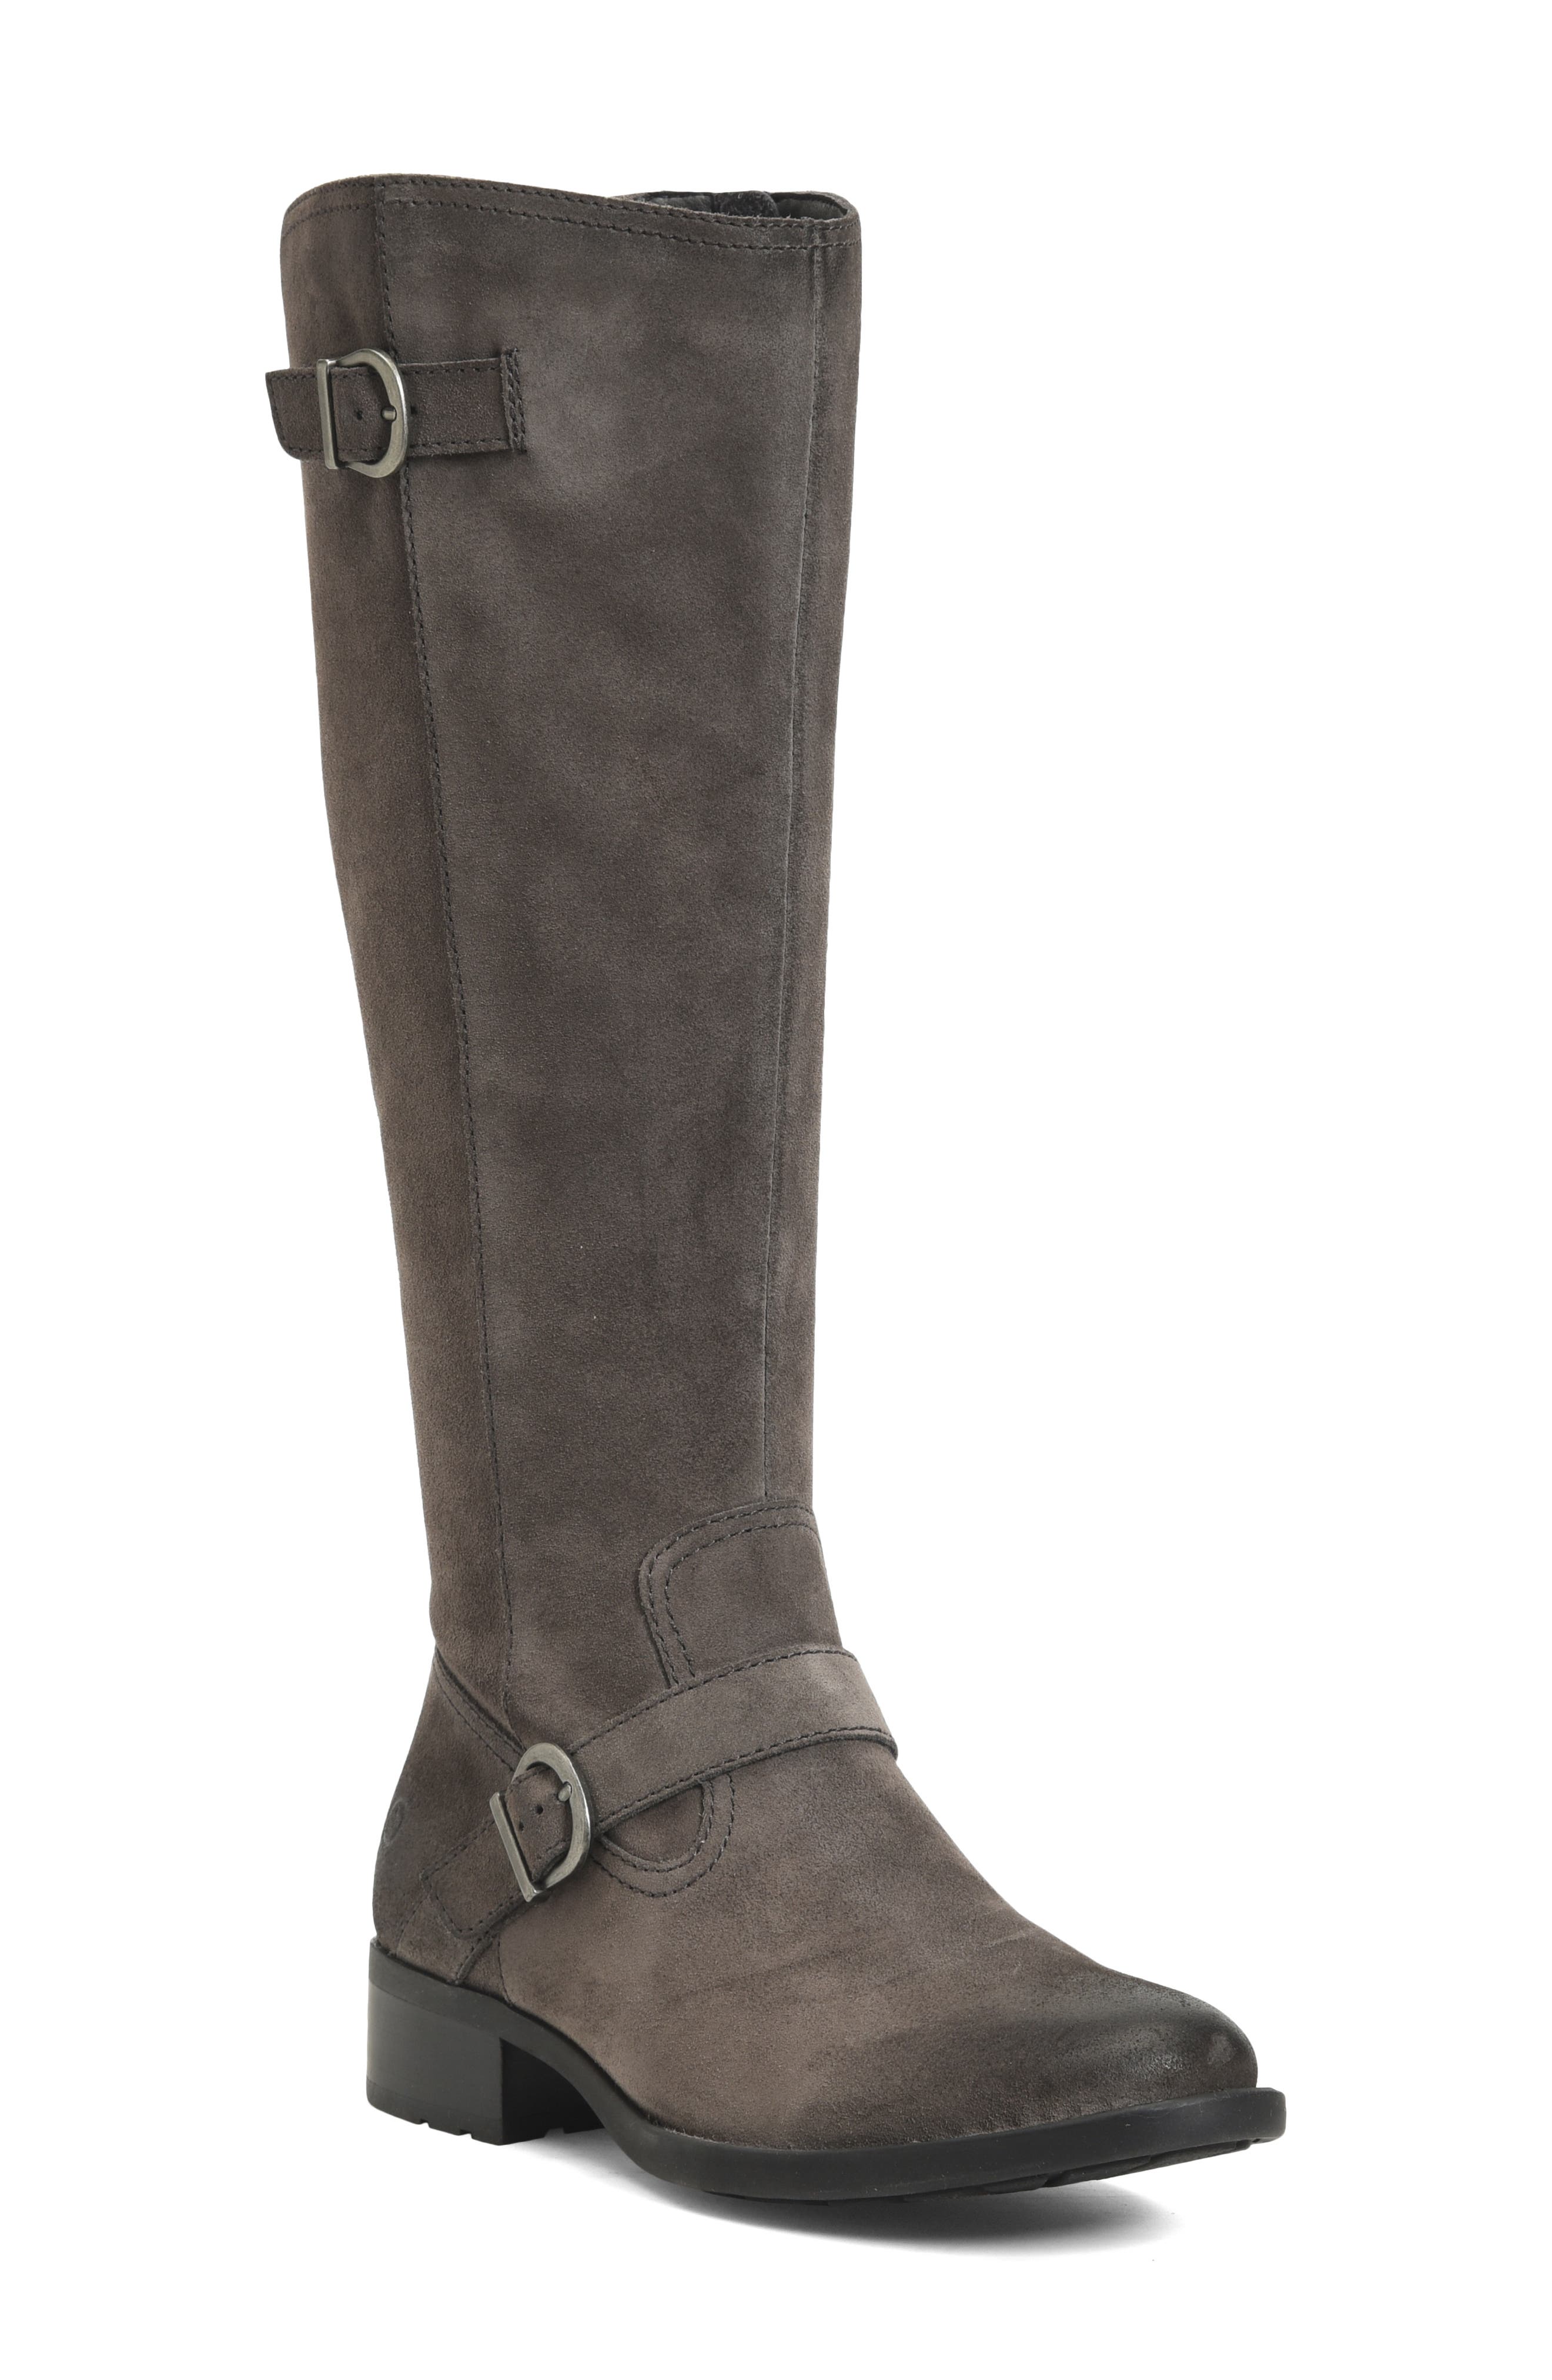 Born Børn Chesire Knee High Boot In Grey Suede | ModeSens